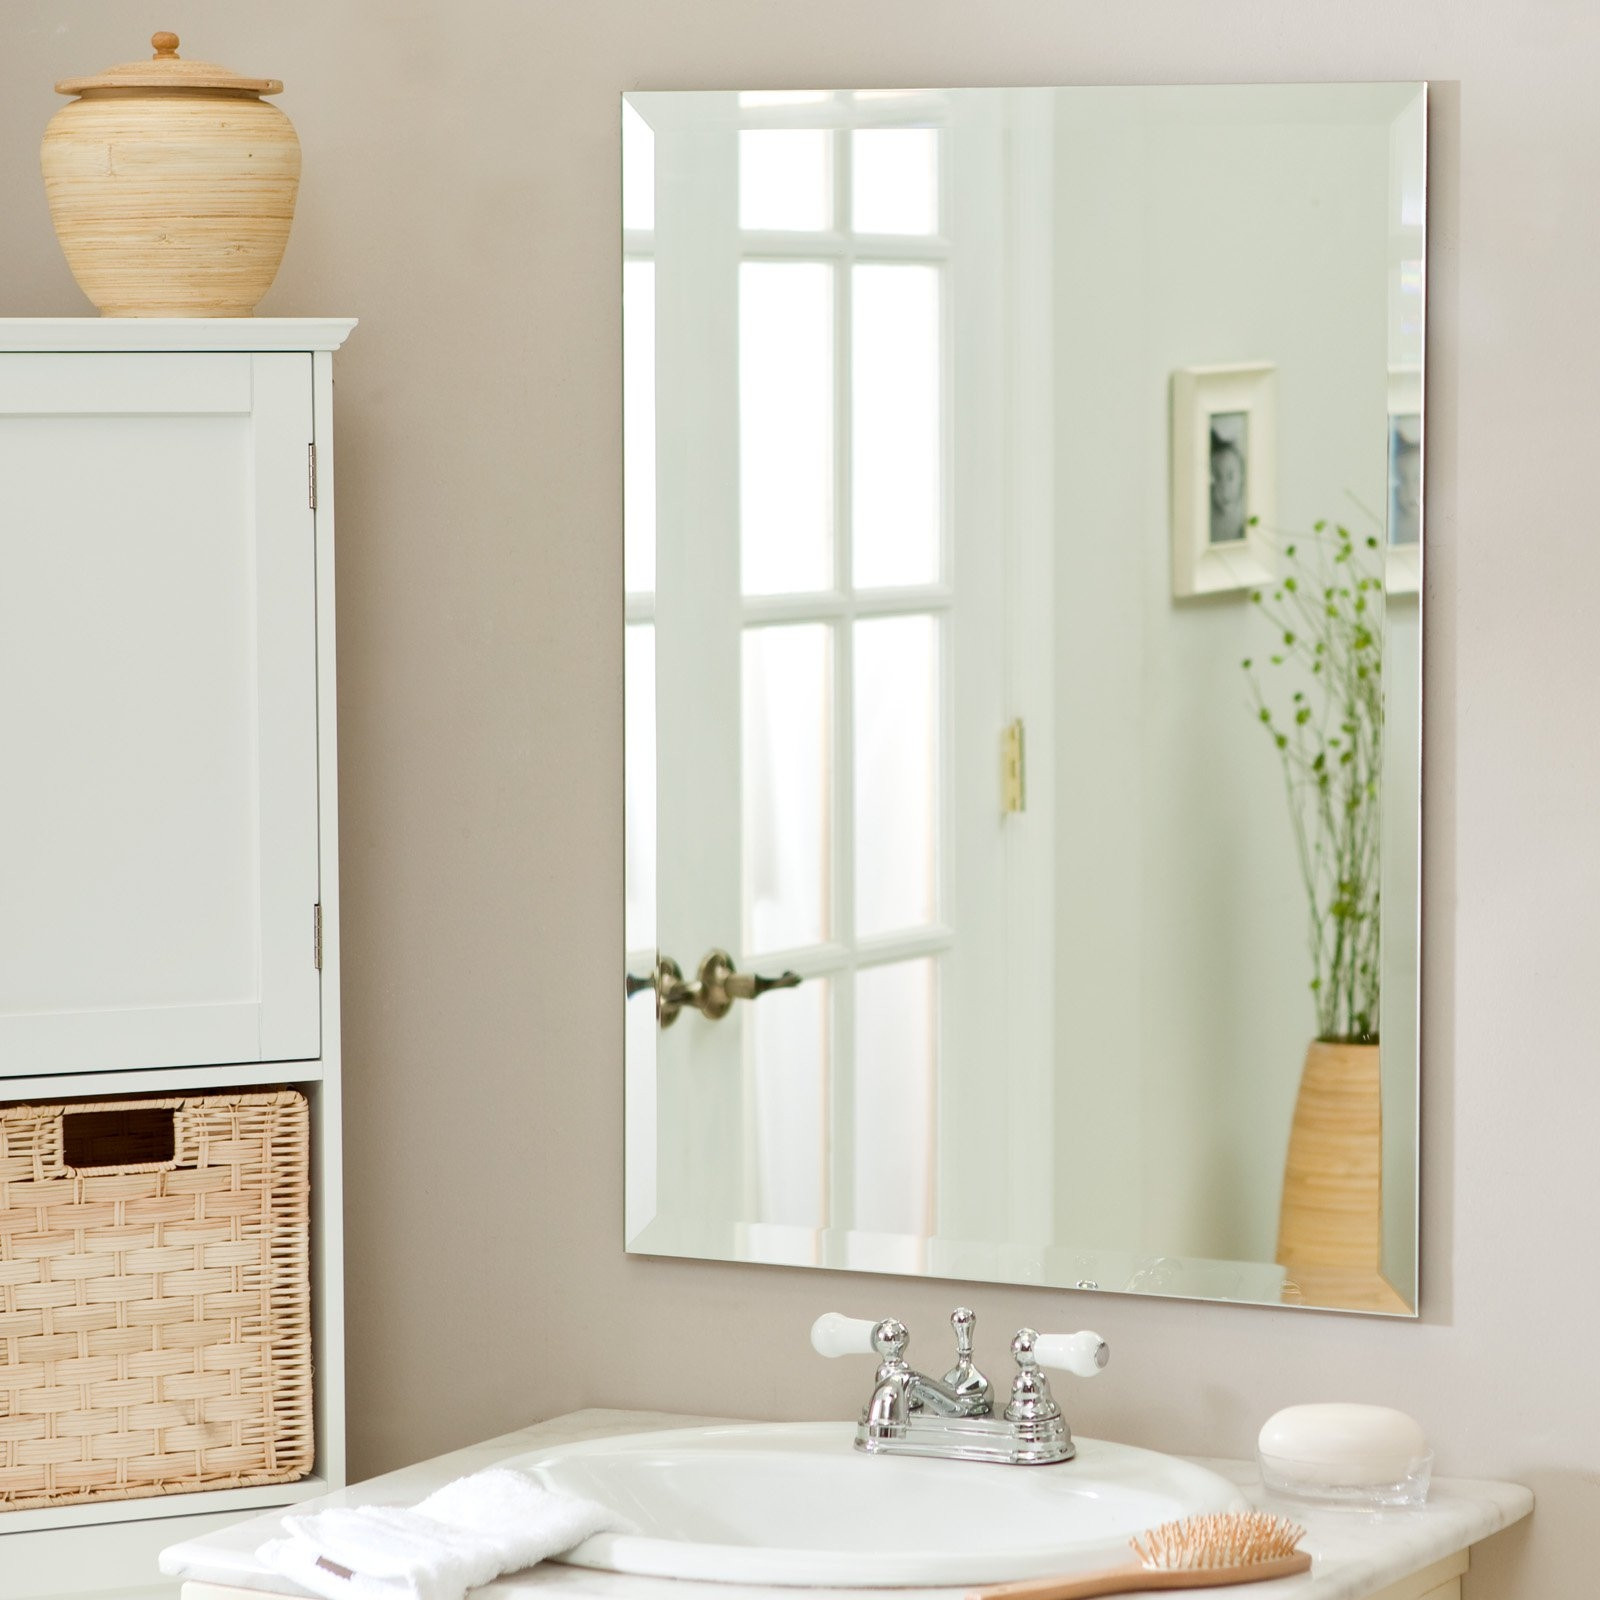 30 X 40 Bathroom Mirror
 15 Best Wall Mirror Without Frame